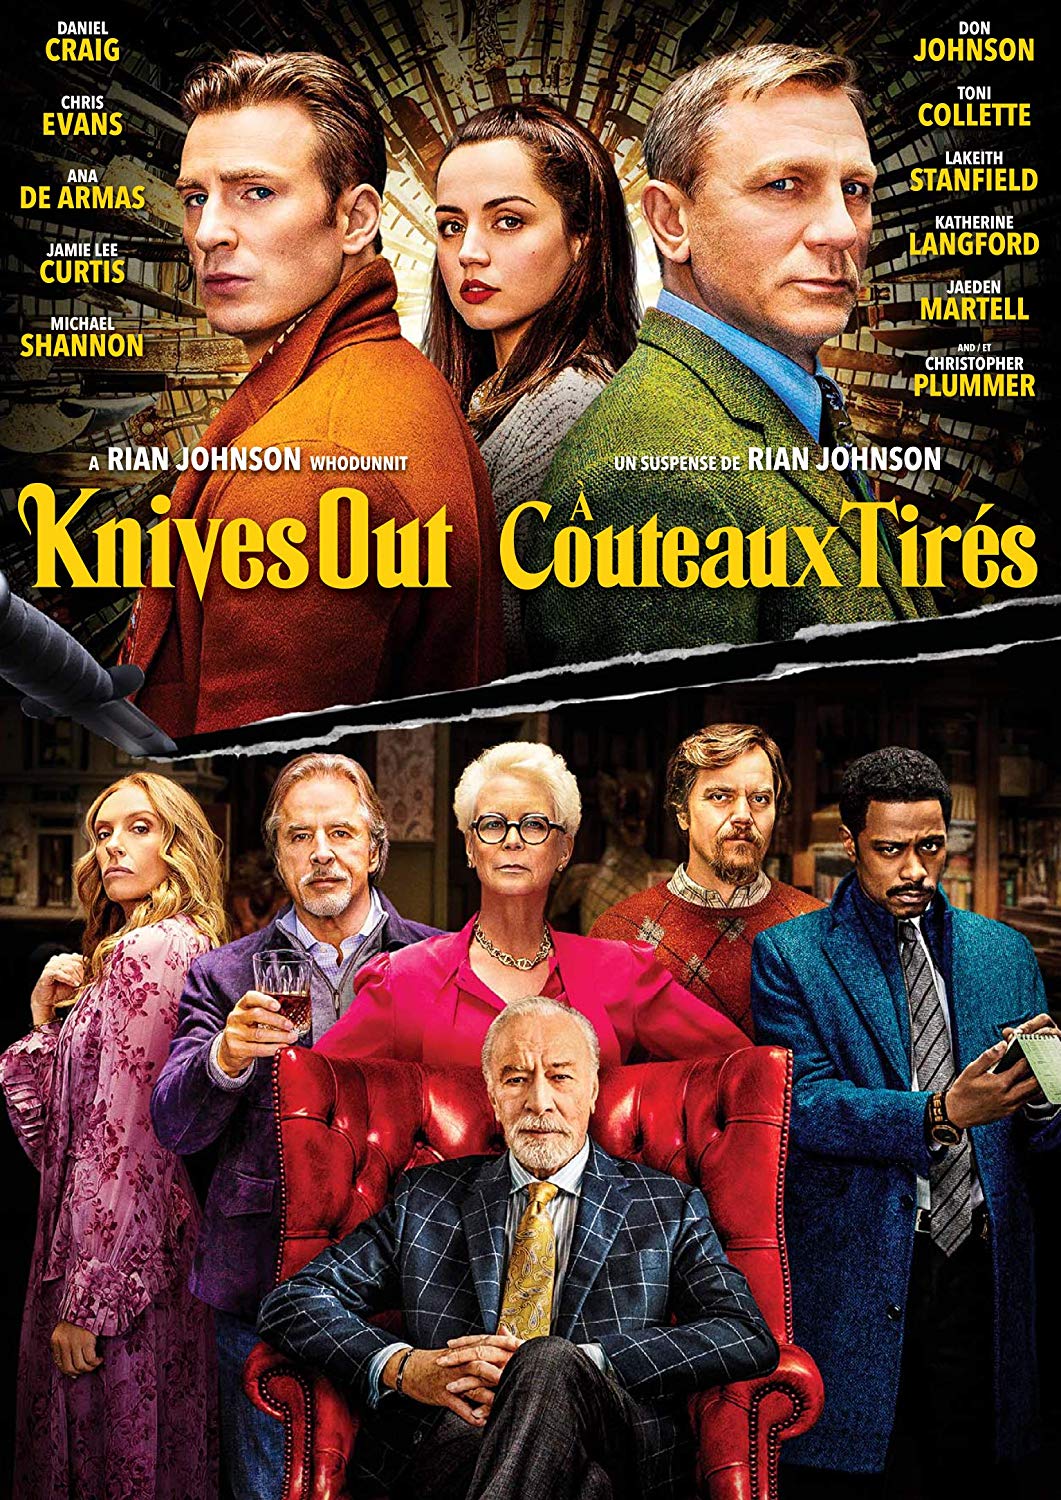 Knives out [DVD] (2019).  Directed by Rian Johnson.